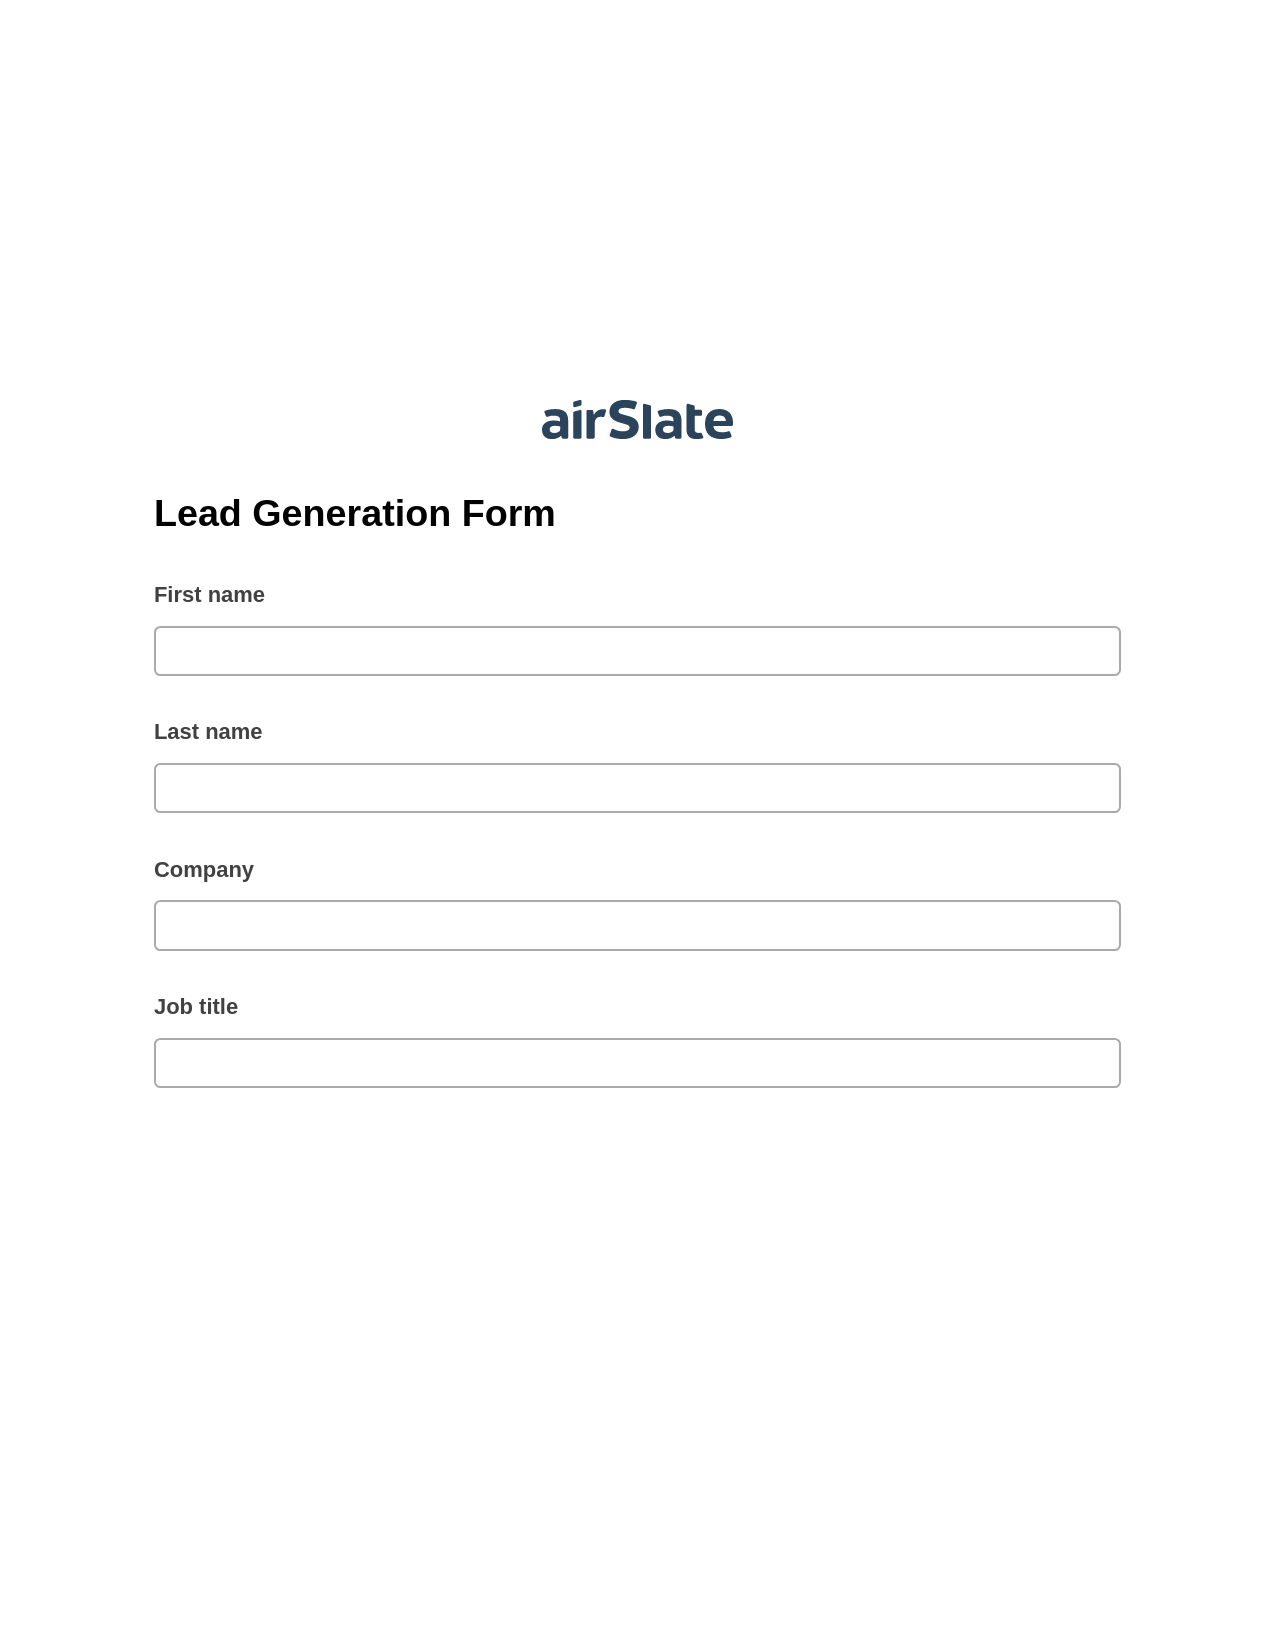 Lead Generation Form Pre-fill from Salesforce Records Bot, Send a Slate to Salesforce Contact Bot, Post-finish Document Bot